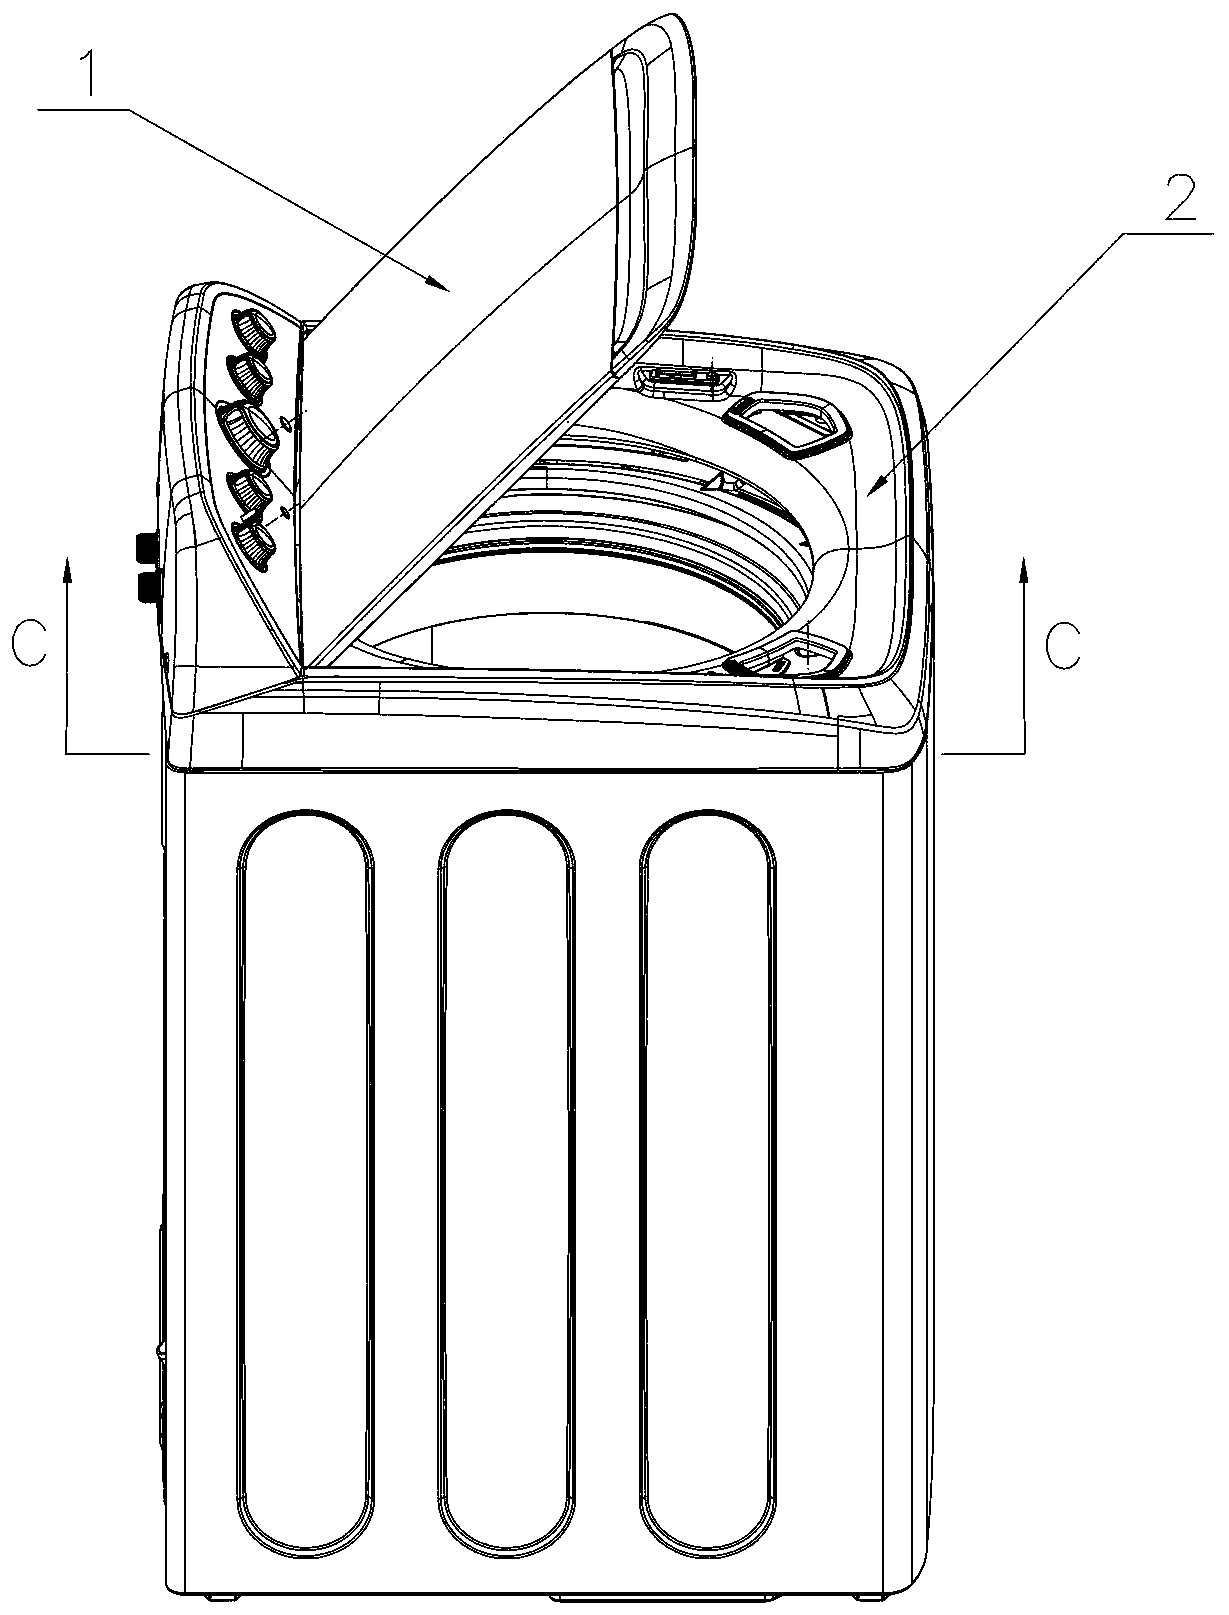 A washing machine equipped with an upper cover closing buffer device